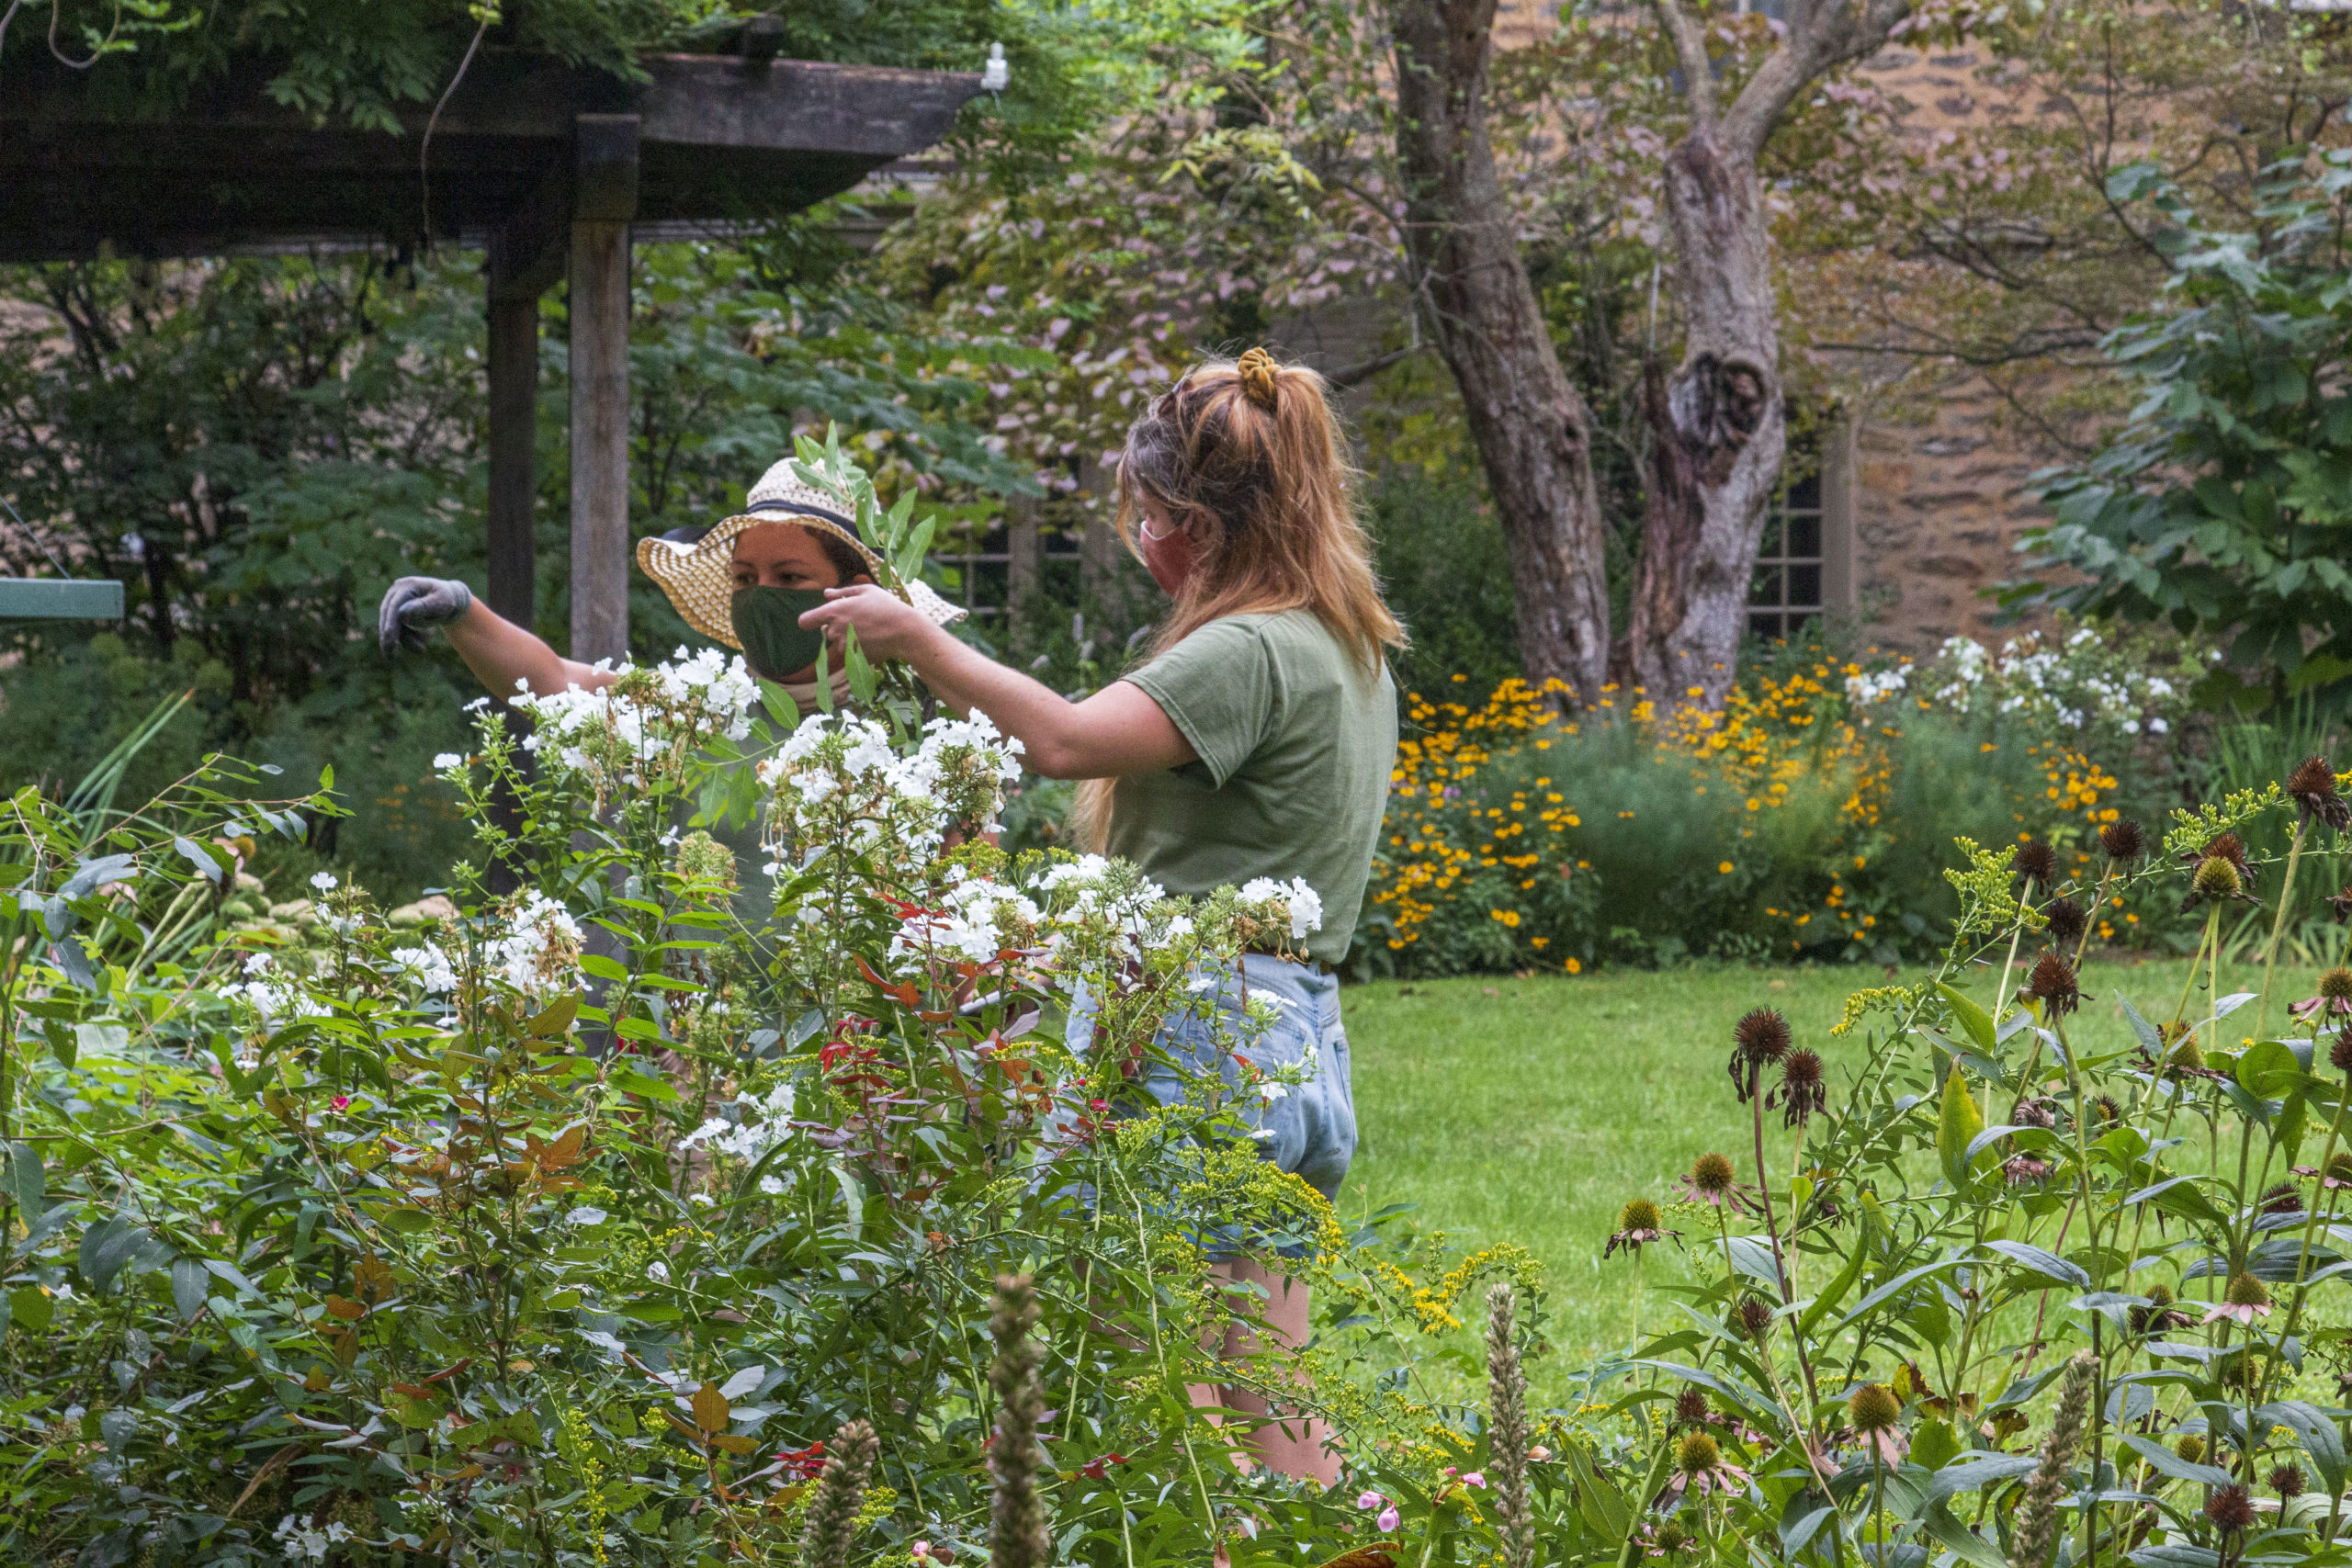 Two gardeners discuss perennial care in front of a mixed bed of phlox and other native plants.